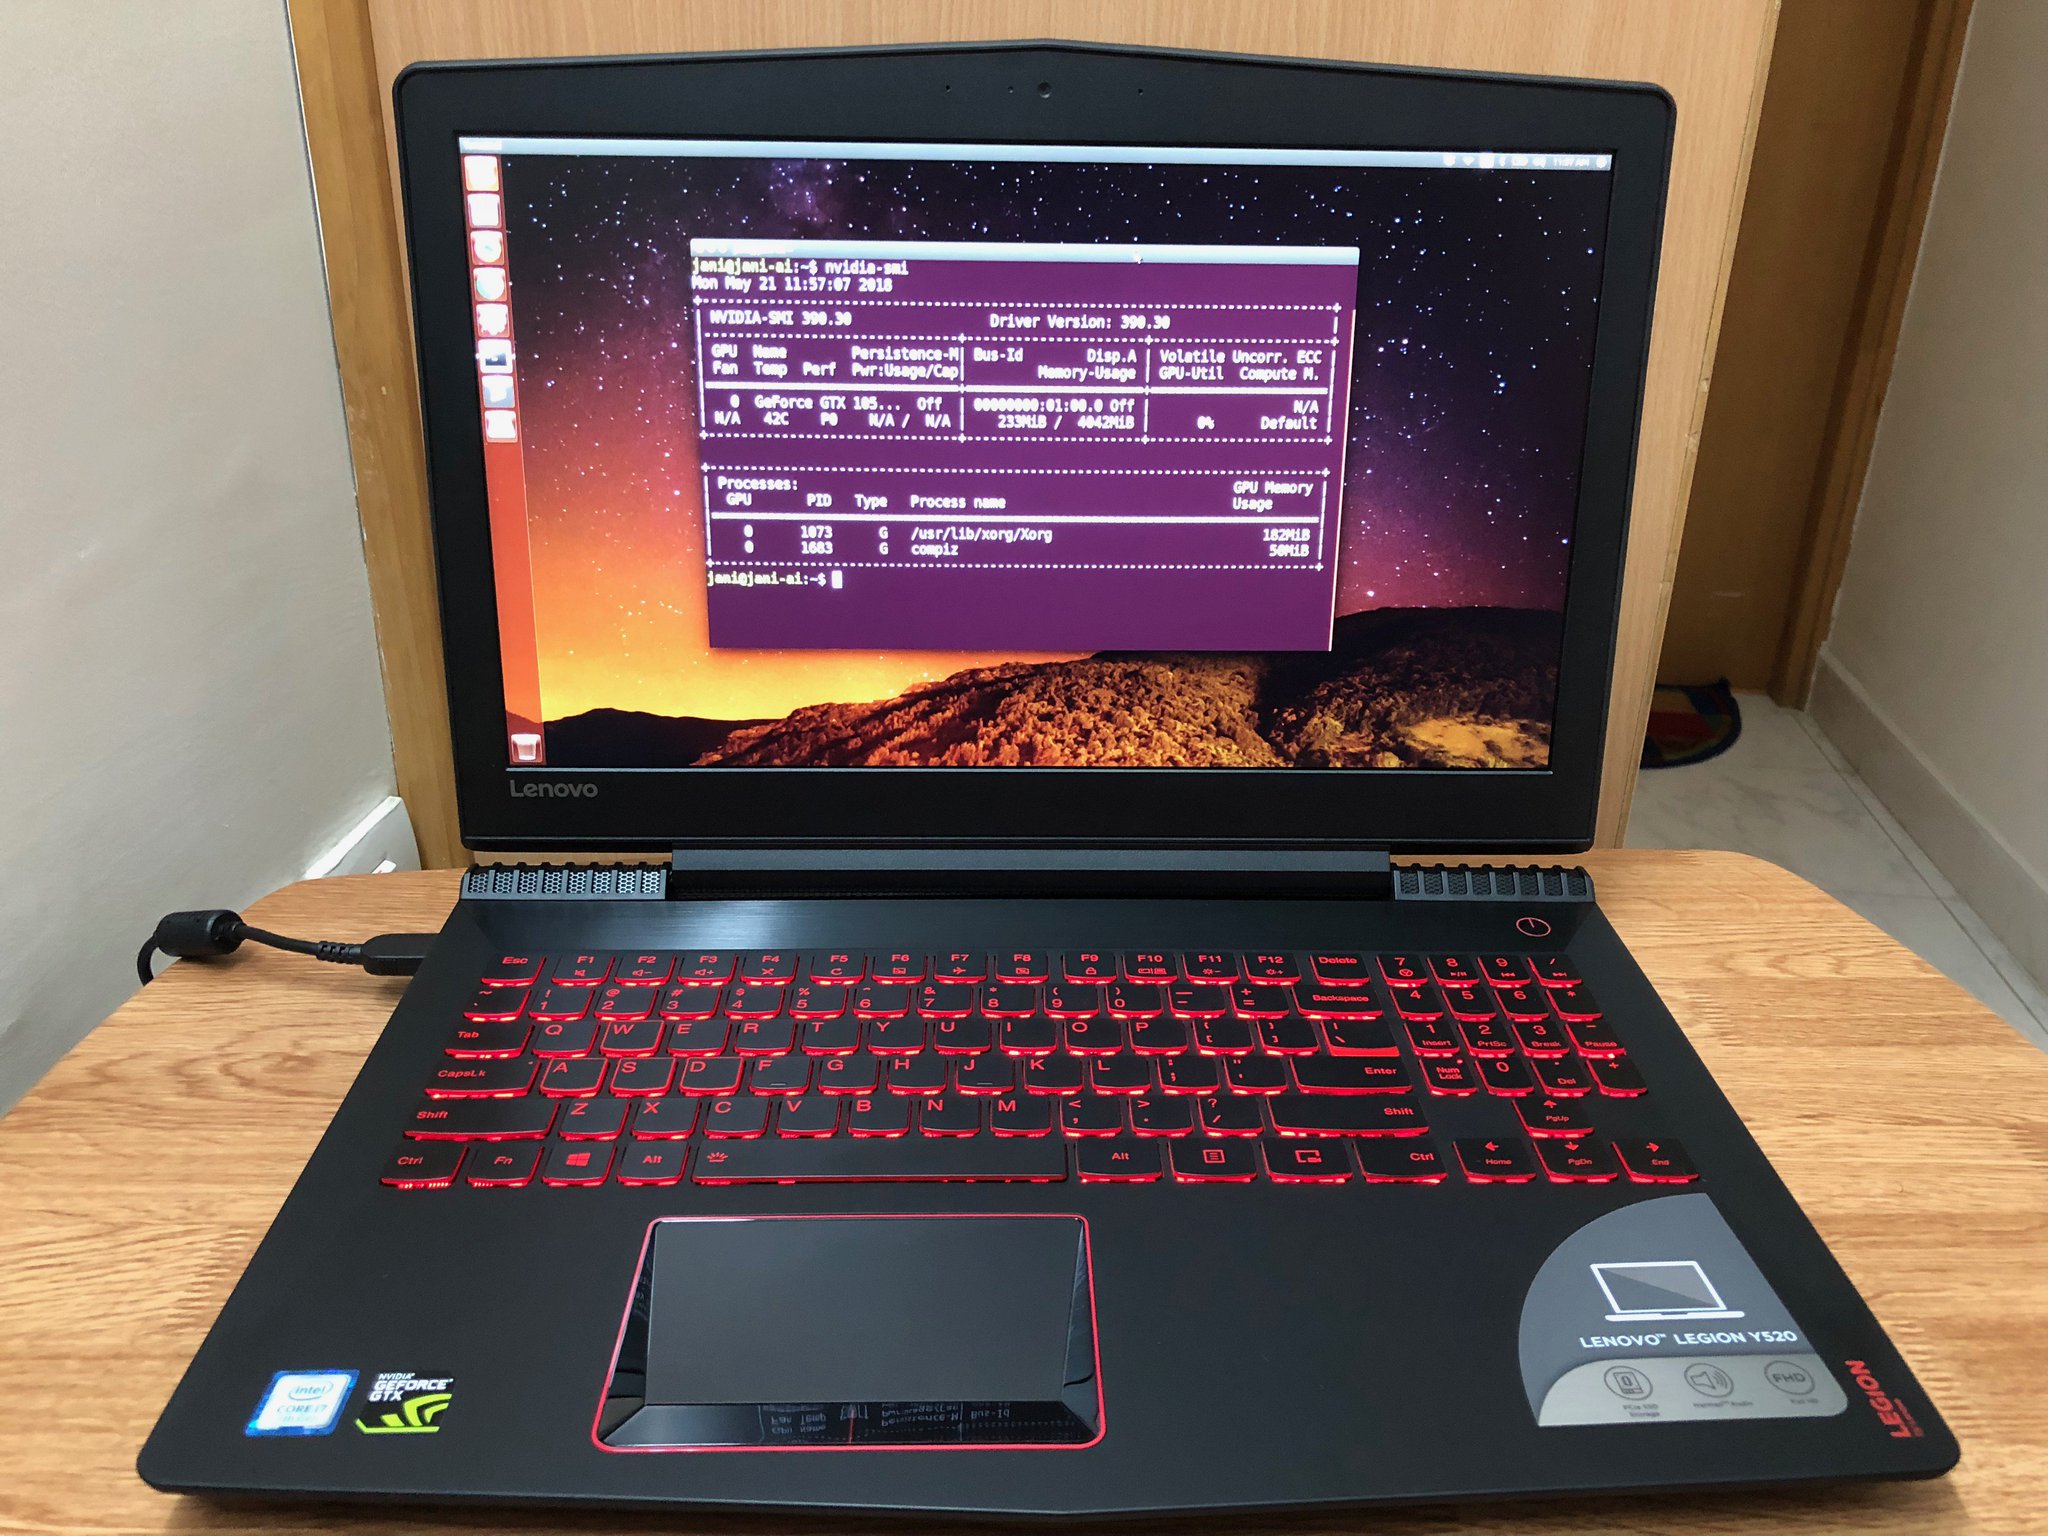 Lenovo legion y7000 review: performance over flashy features